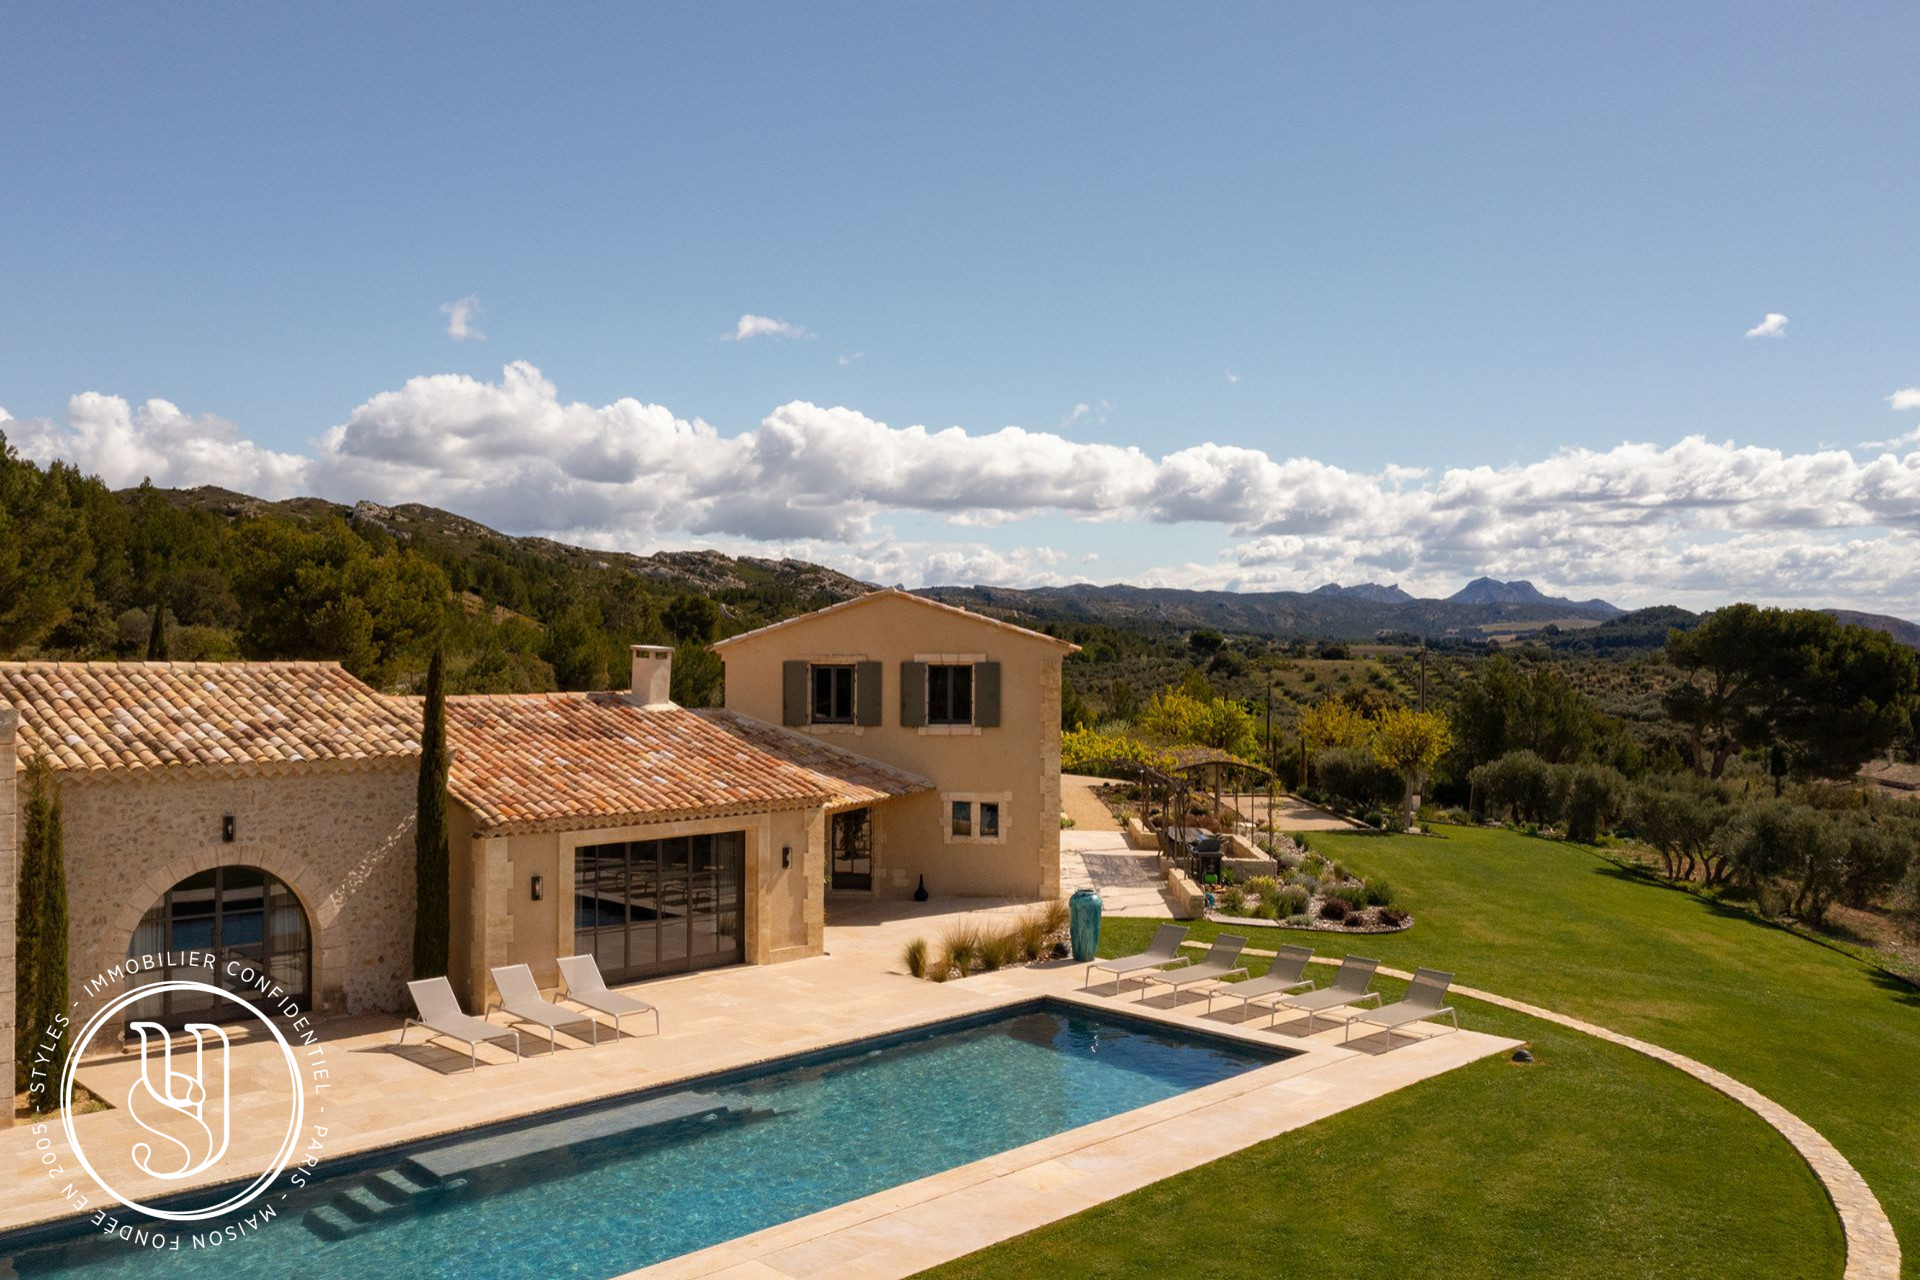 Saint-Rémy-de-Provence - nearby, panoramic views, an unspoilt setting, an exceptional p - image 11